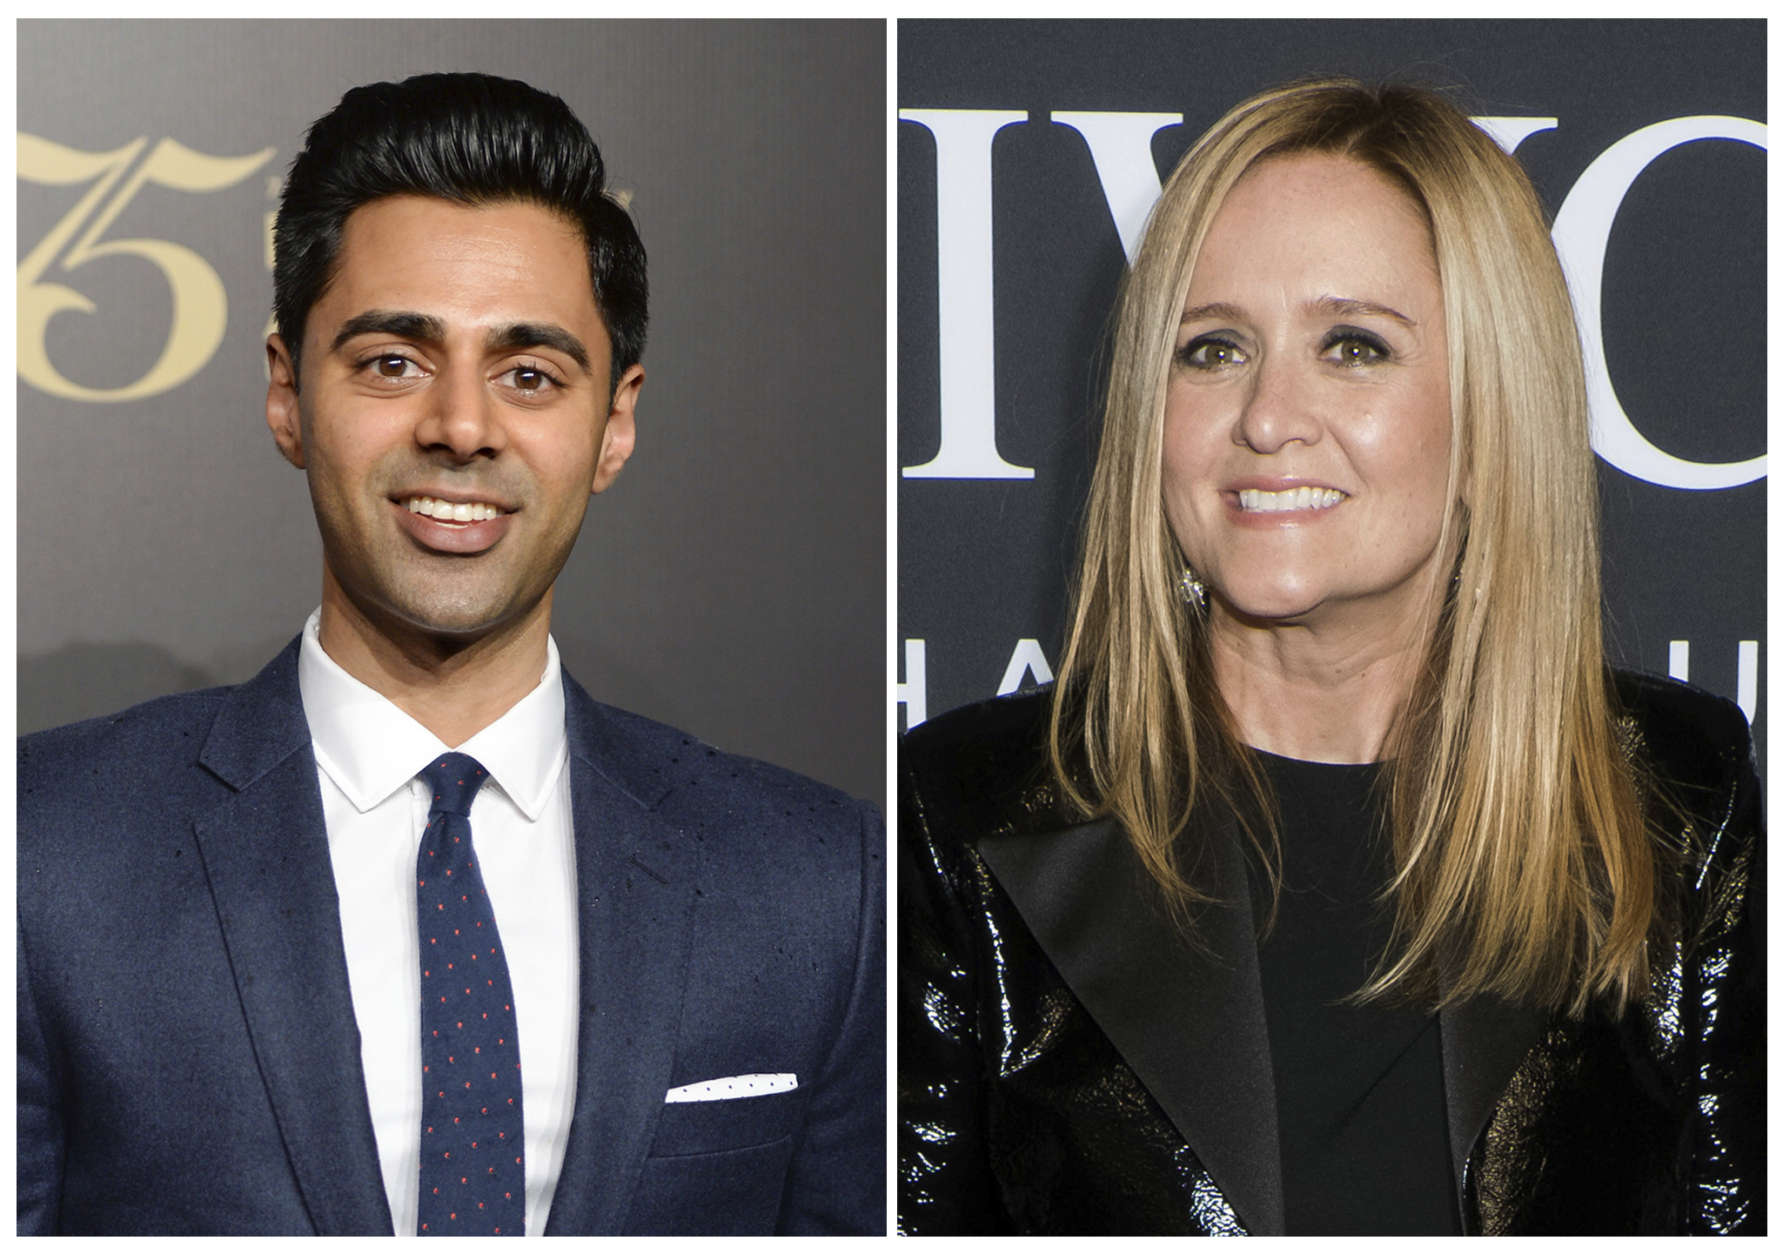 In this combination photo, Hasan Minhaj attends the 75th Annual Peabody Awards Ceremony on May 21, 2016, in New York, left, and Samantha Bee attends the IWC Schaffhausen Tribeca Film Festival event on April 20, 2017, in New York. On Saturday, April 29, Minhaj will host the annual White House Correspondents' Dinner in Washington while Bee will be hosting the "Not the White House Correspondents’ Dinner" in Washington. (Photo by Evan Agostini, left, and Charles Sykes/Invision/AP, File)